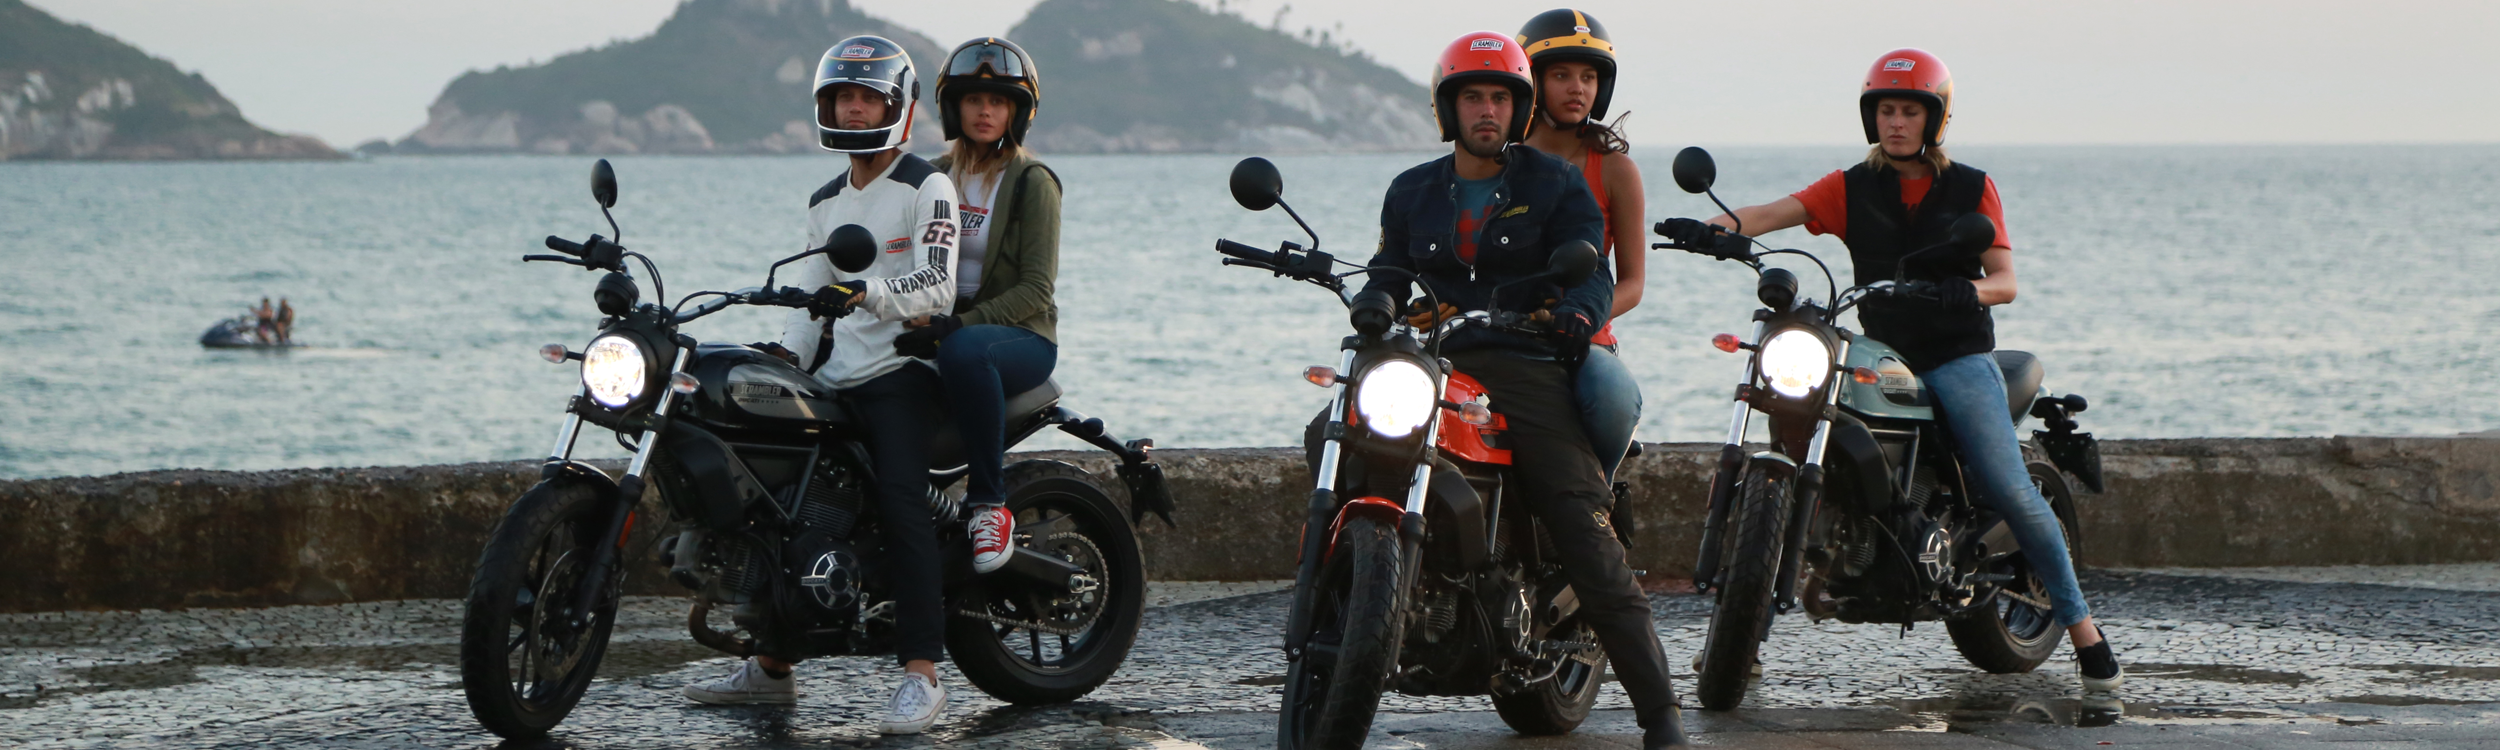 Group of motorcycle riders parked with ocean and cliffs in background.